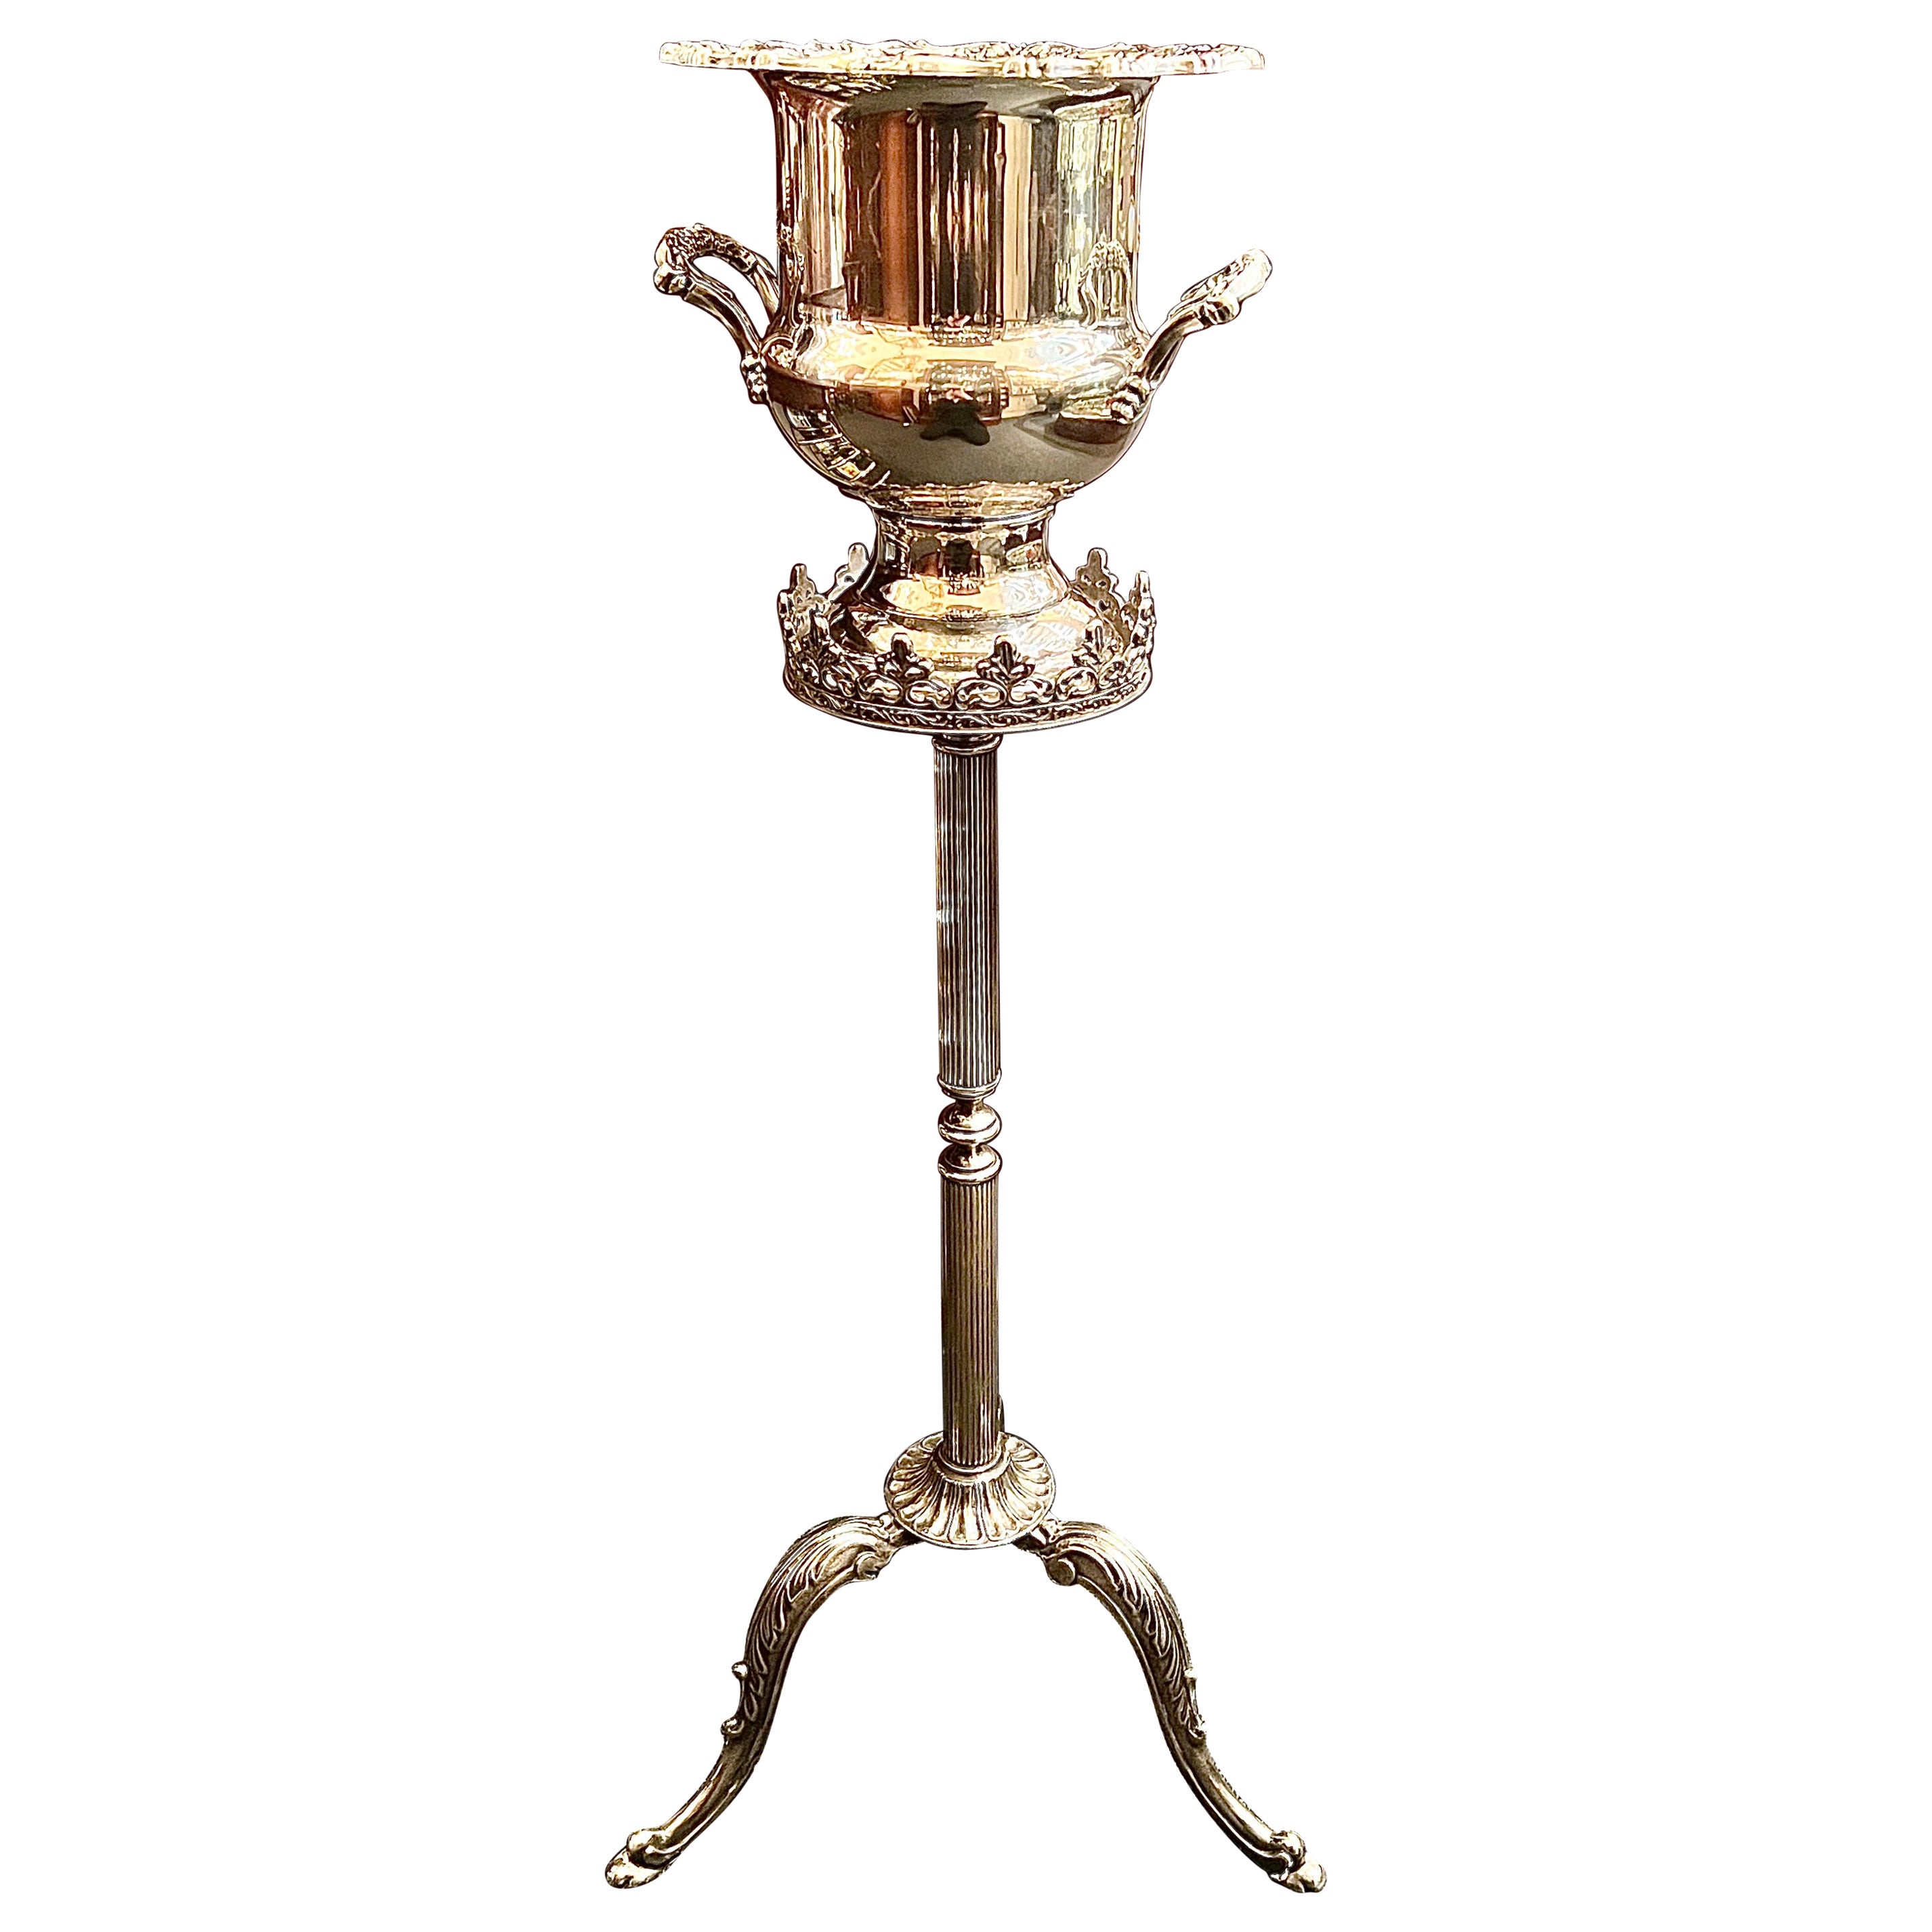 Estate Silver Plated Champagne Bucket on Stand, Circa 1930-1940. For Sale